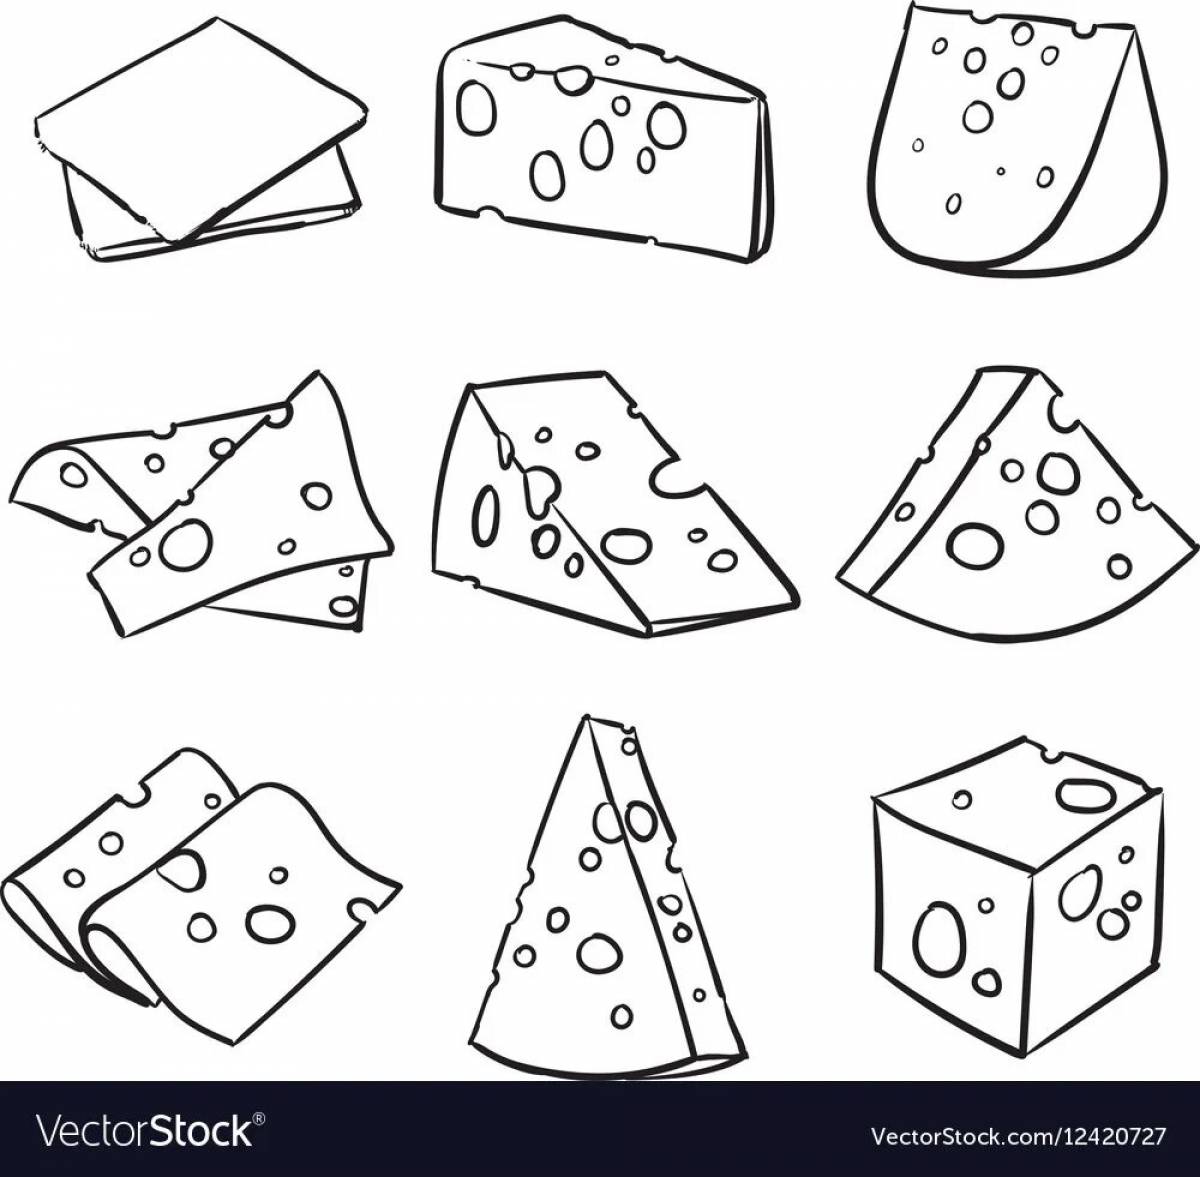 A piece of cheese #3